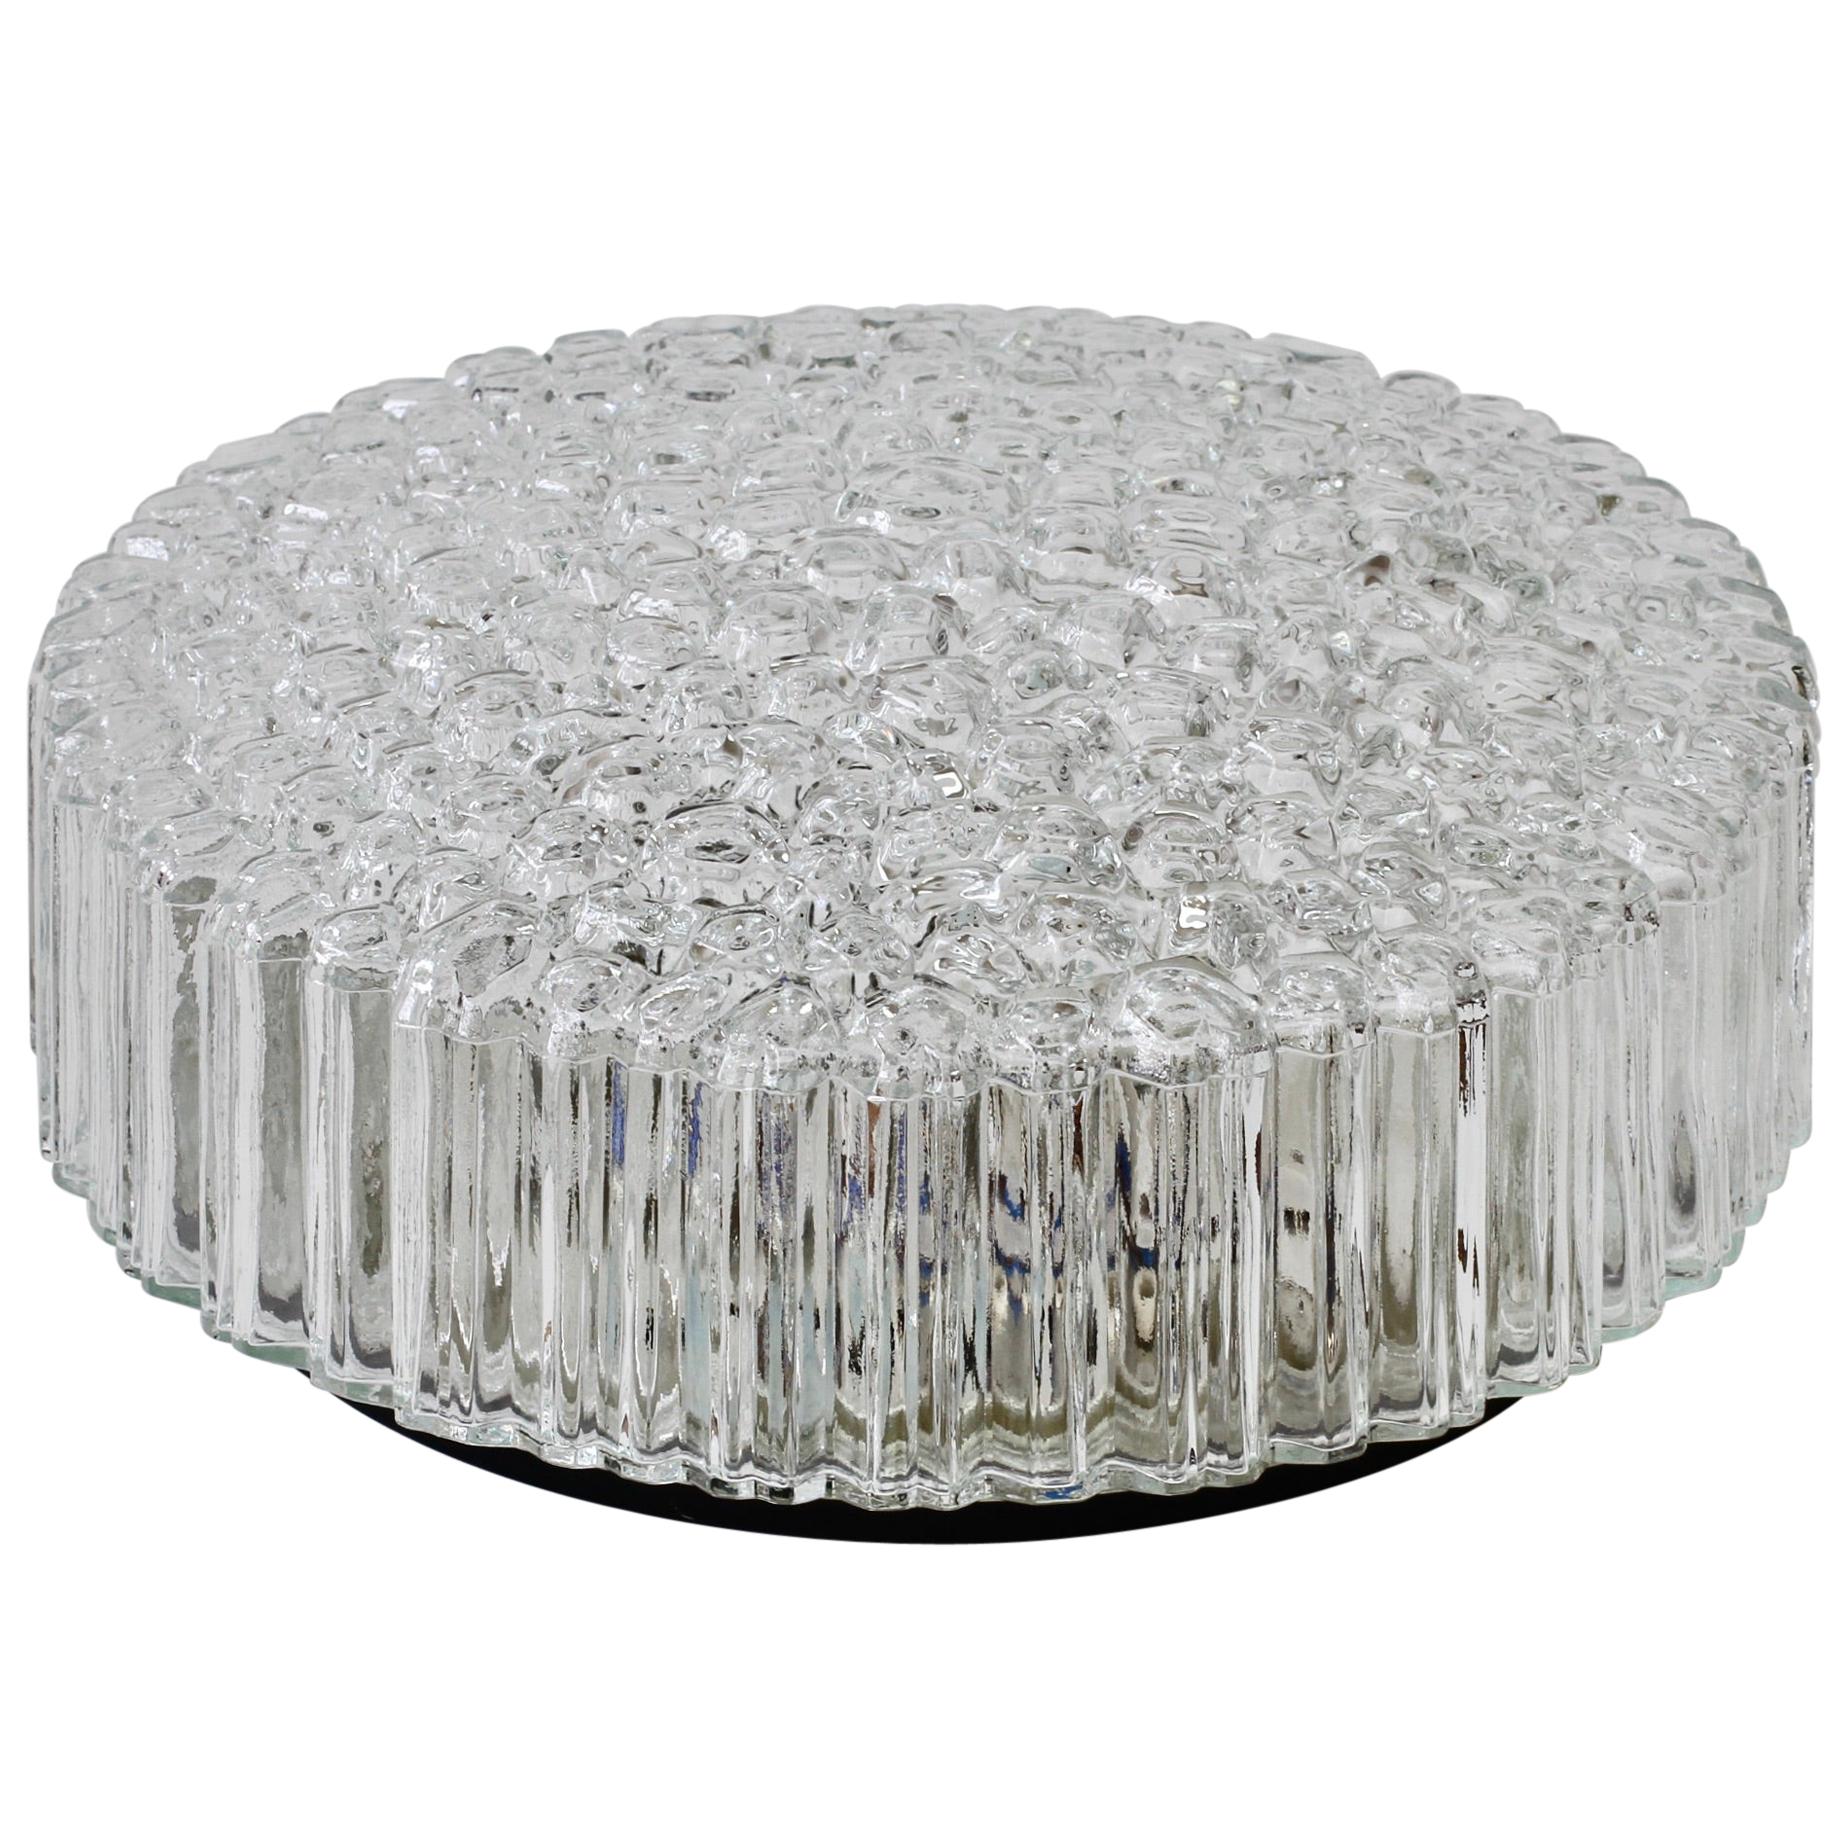 1 of 2 Limburg Vintage 1970s Textured Clear Ice Crystal Glass Flush Mount Lights For Sale